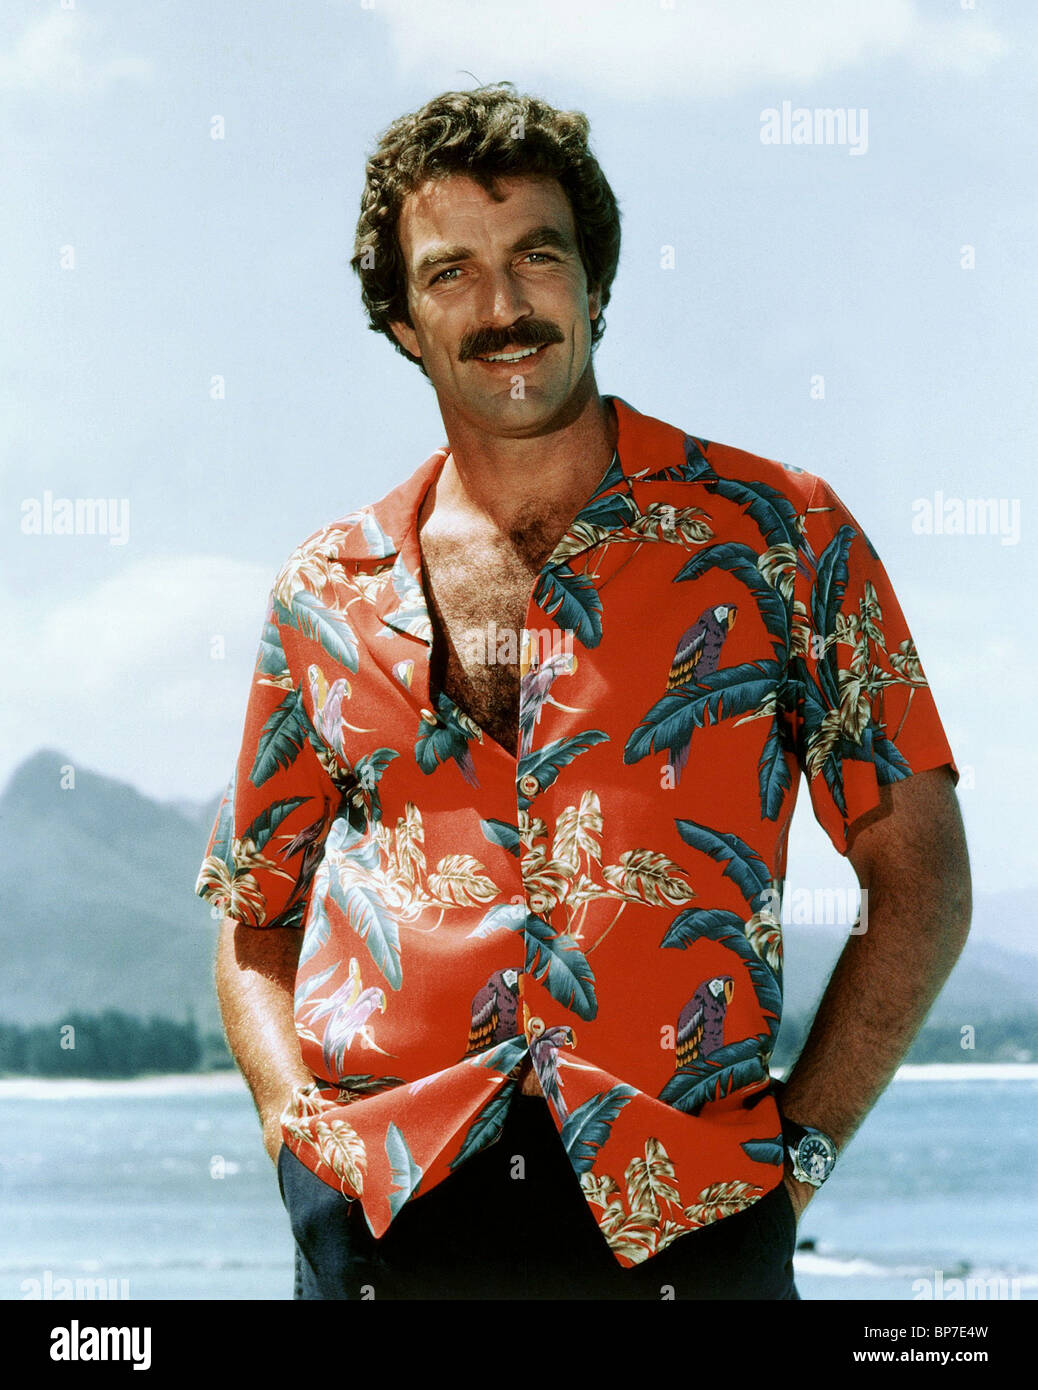 Download this stock image: TOM SELLECK MAGNUM P.I